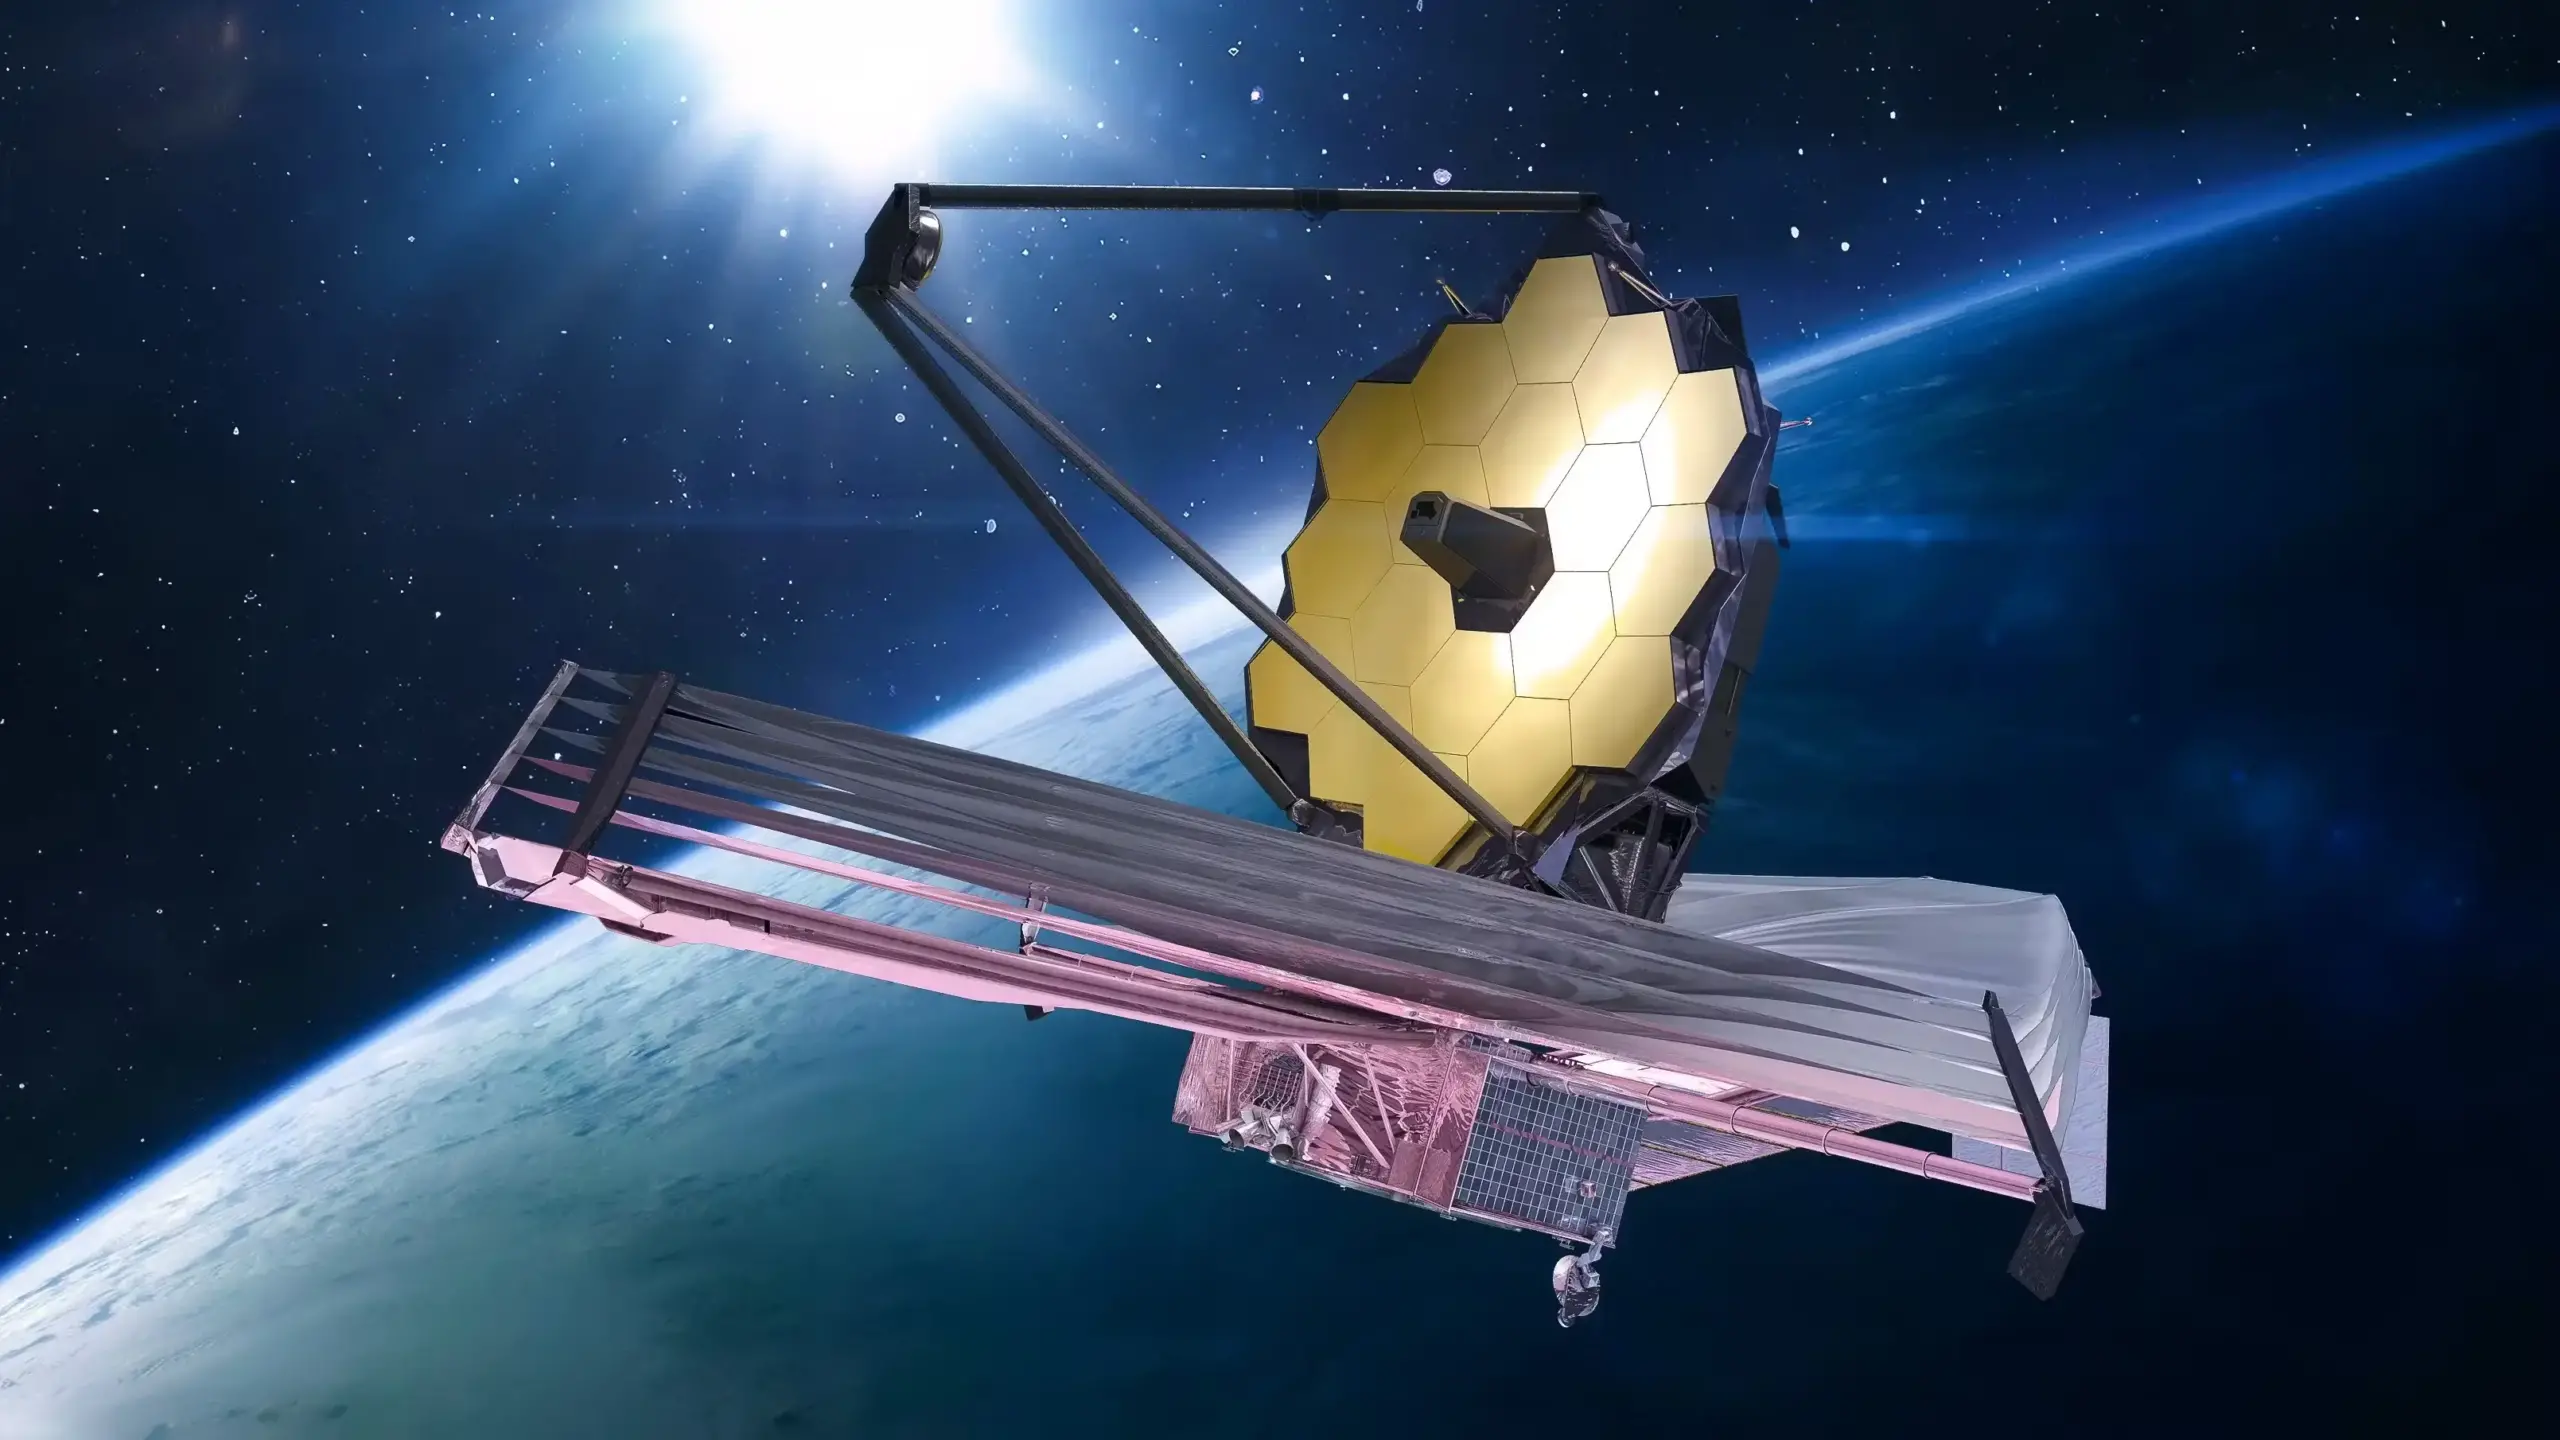 Digital visualization of the James Webb Space Telescope exploring a nebula, with its instruments pointed towards a colorful cloud of gas and dust.